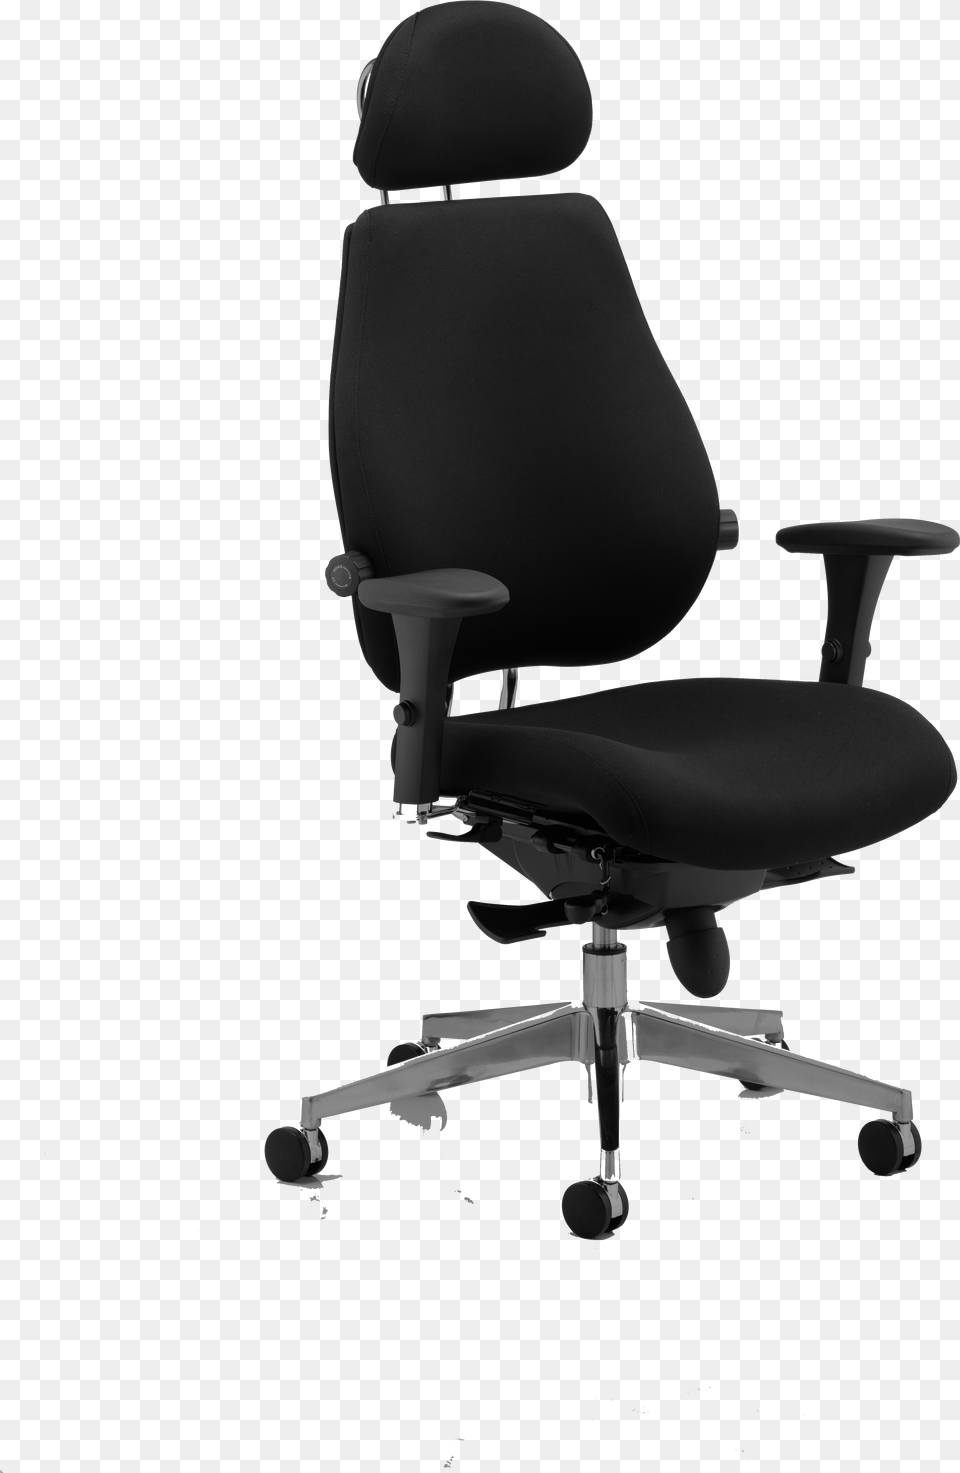 Control 24 Szk, Chair, Furniture, Cushion, Home Decor Png Image